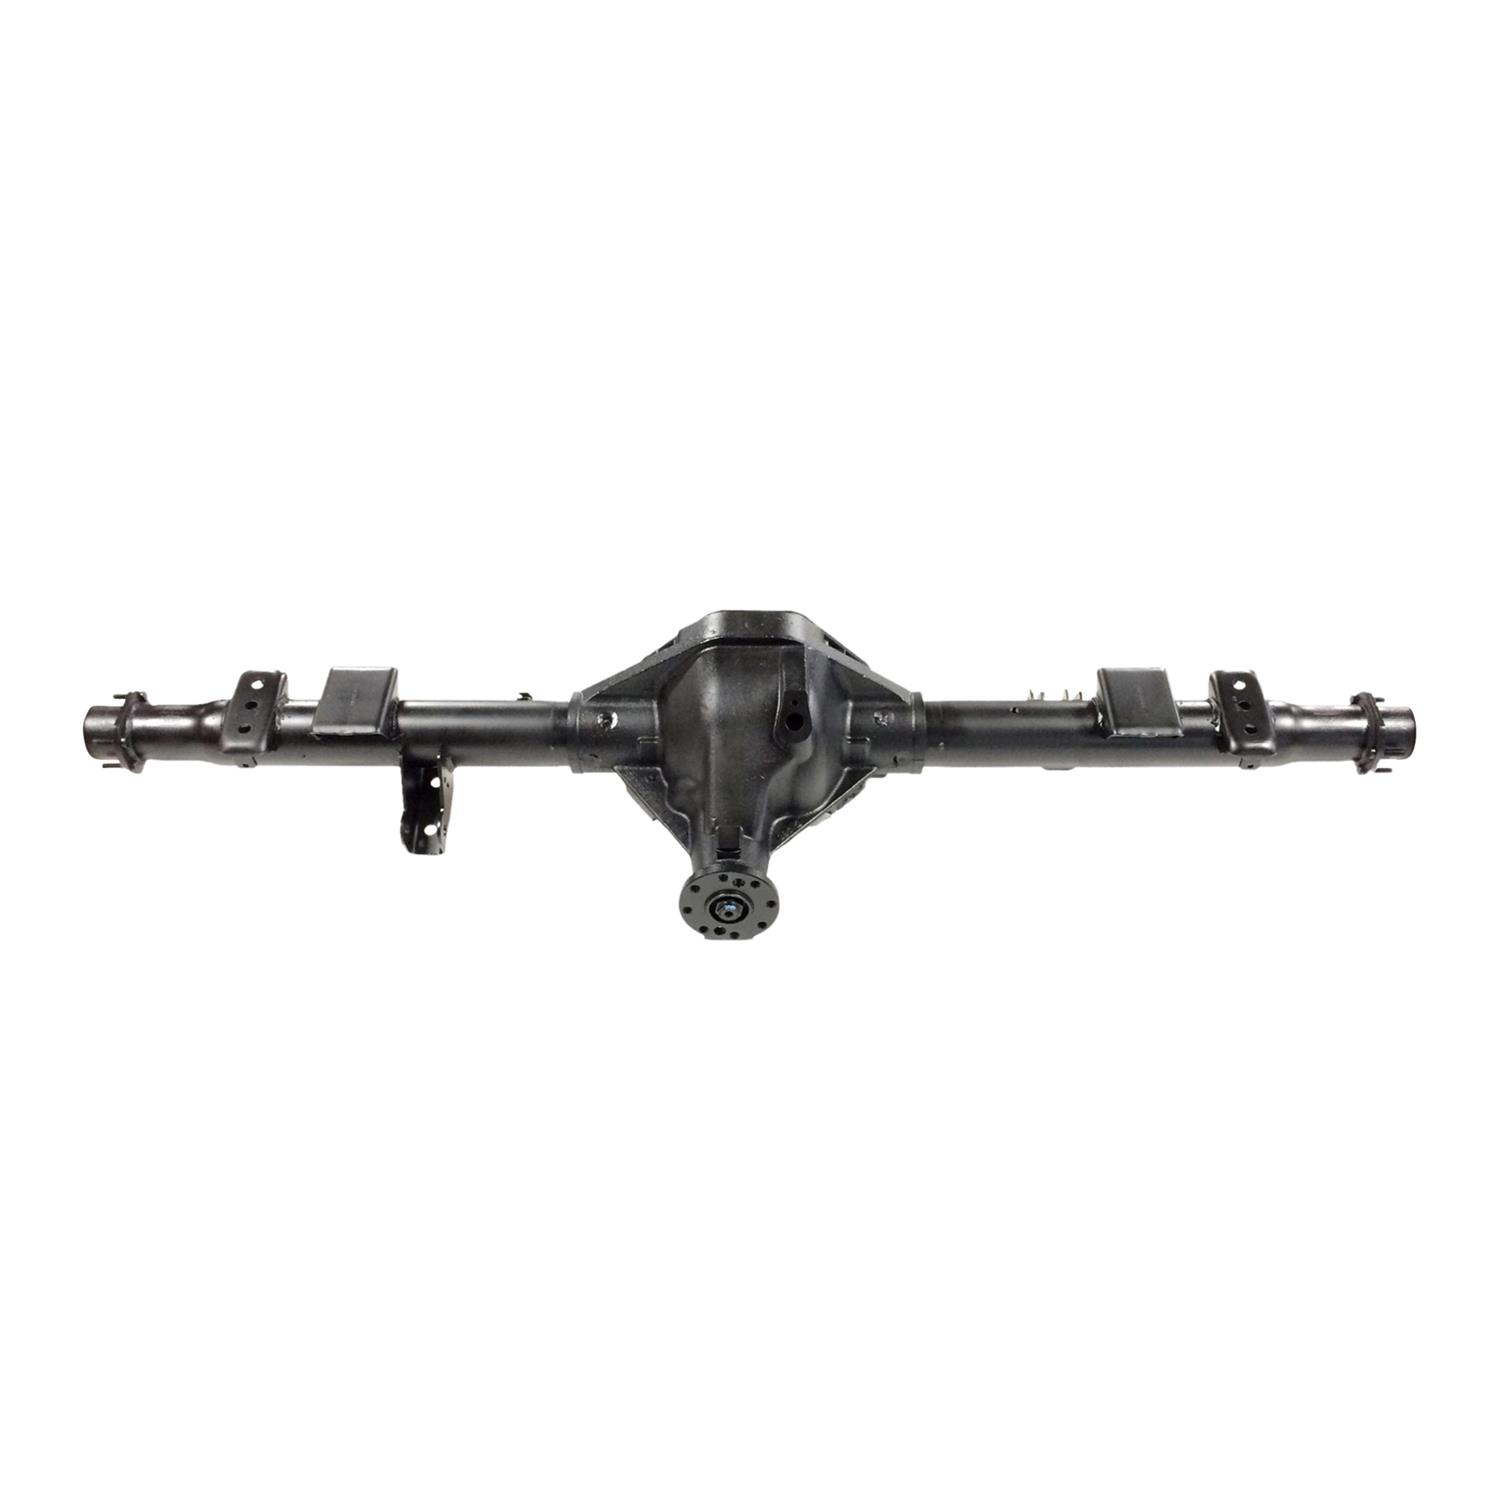 Remanufactured Chrysler 9.25 Rear Open Axle 3.92 Gears 2WD